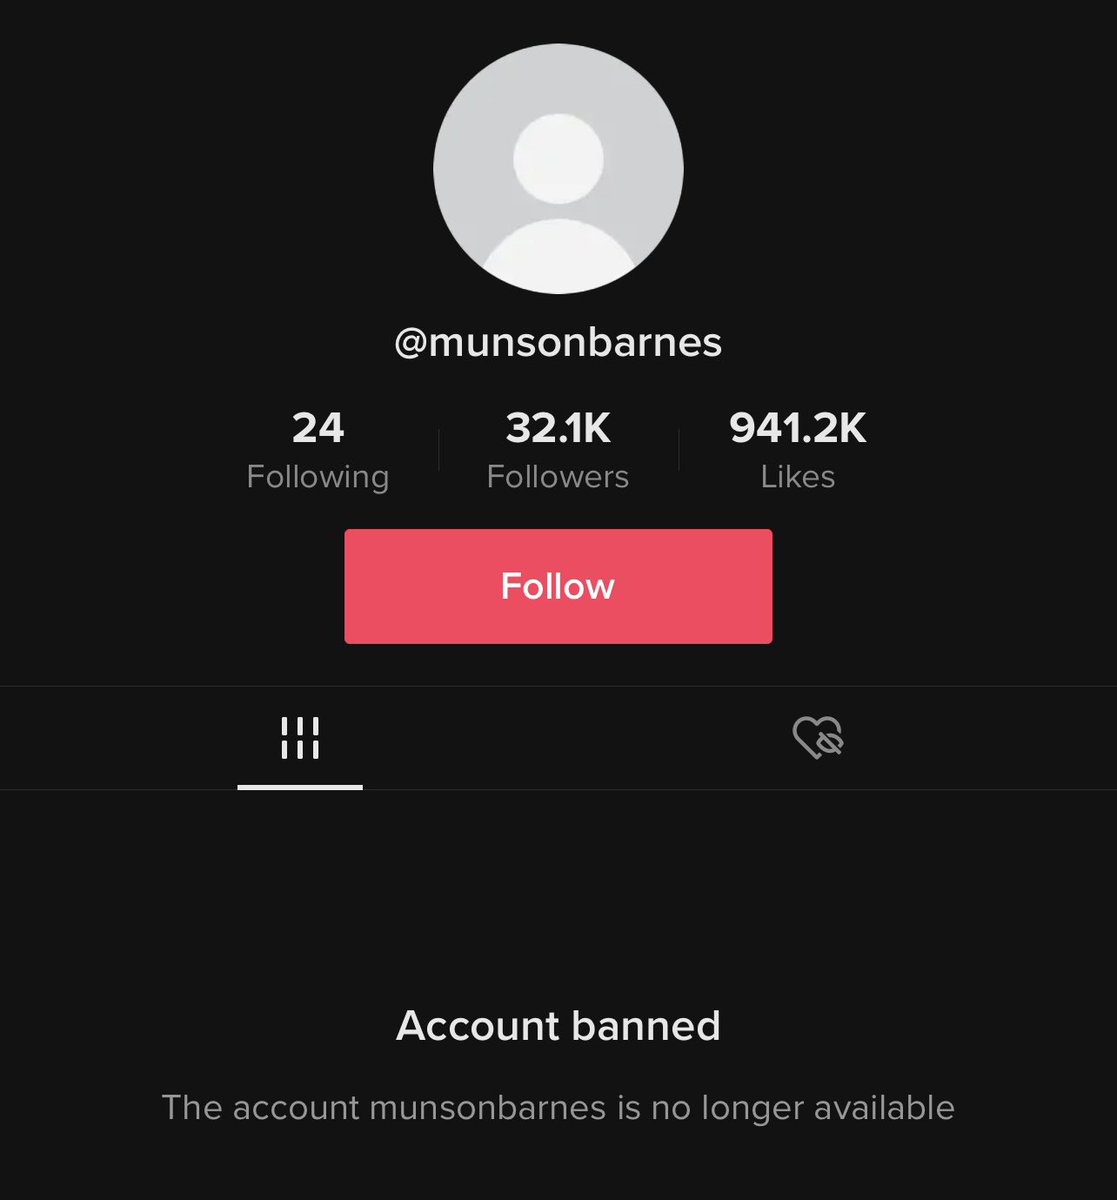 @tiktok_uk was the mass ban on creators an error yesterday? And can you advise if we will all be unbanned? We have already submitted appeals & heard nothing back. As far as I’m aware none of us had any warnings just a straight van even though we hadn’t violated any guidelines…